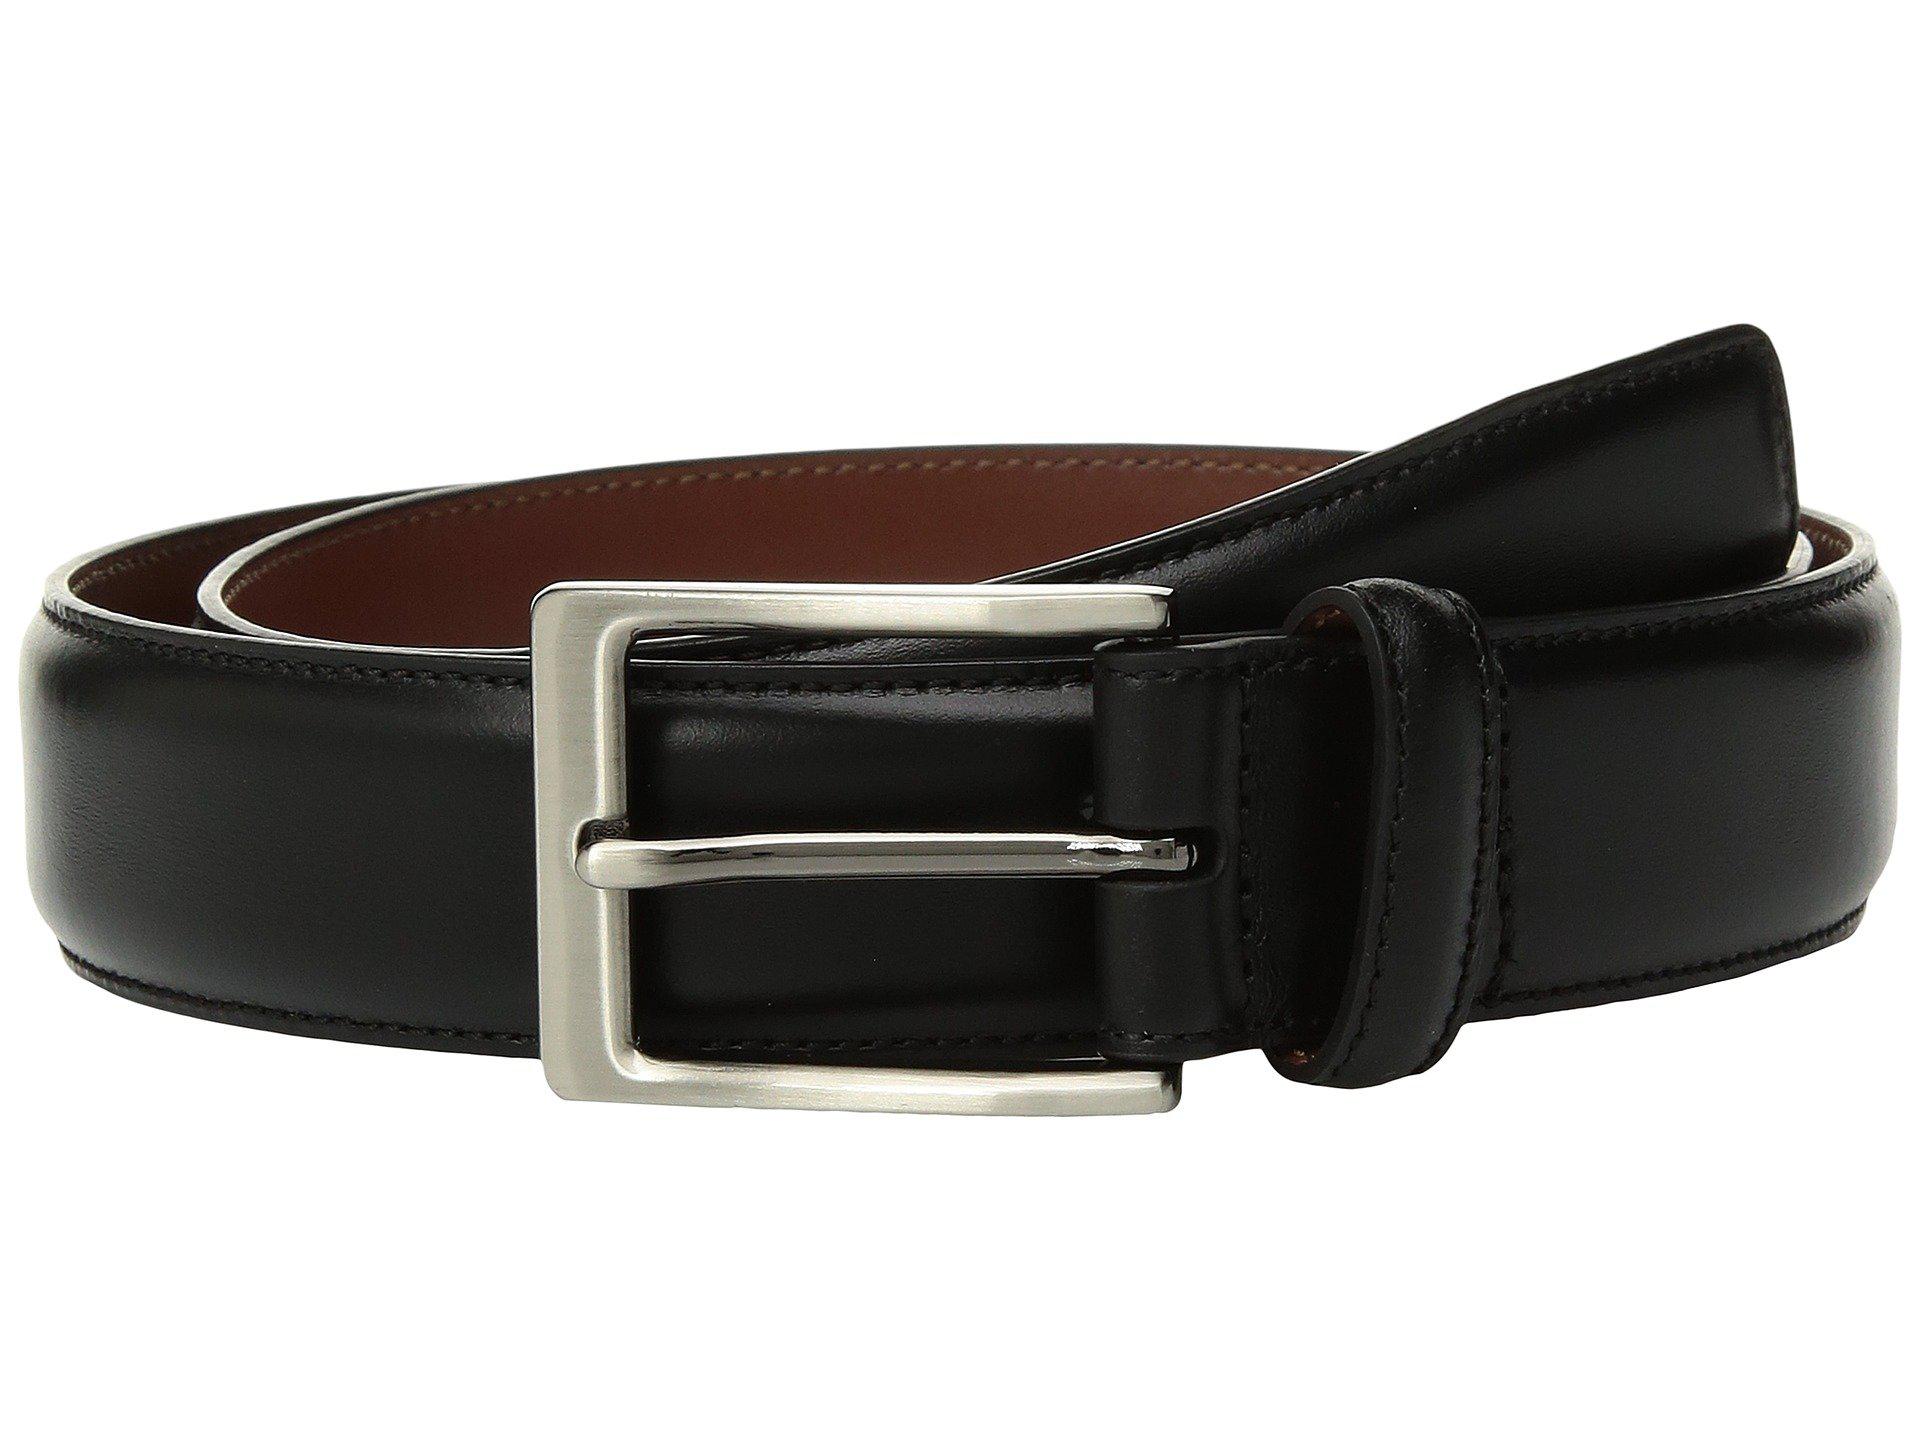 Perry Ellis Portfolio Leather Tan With Burnished Edge Dress Belt in ...